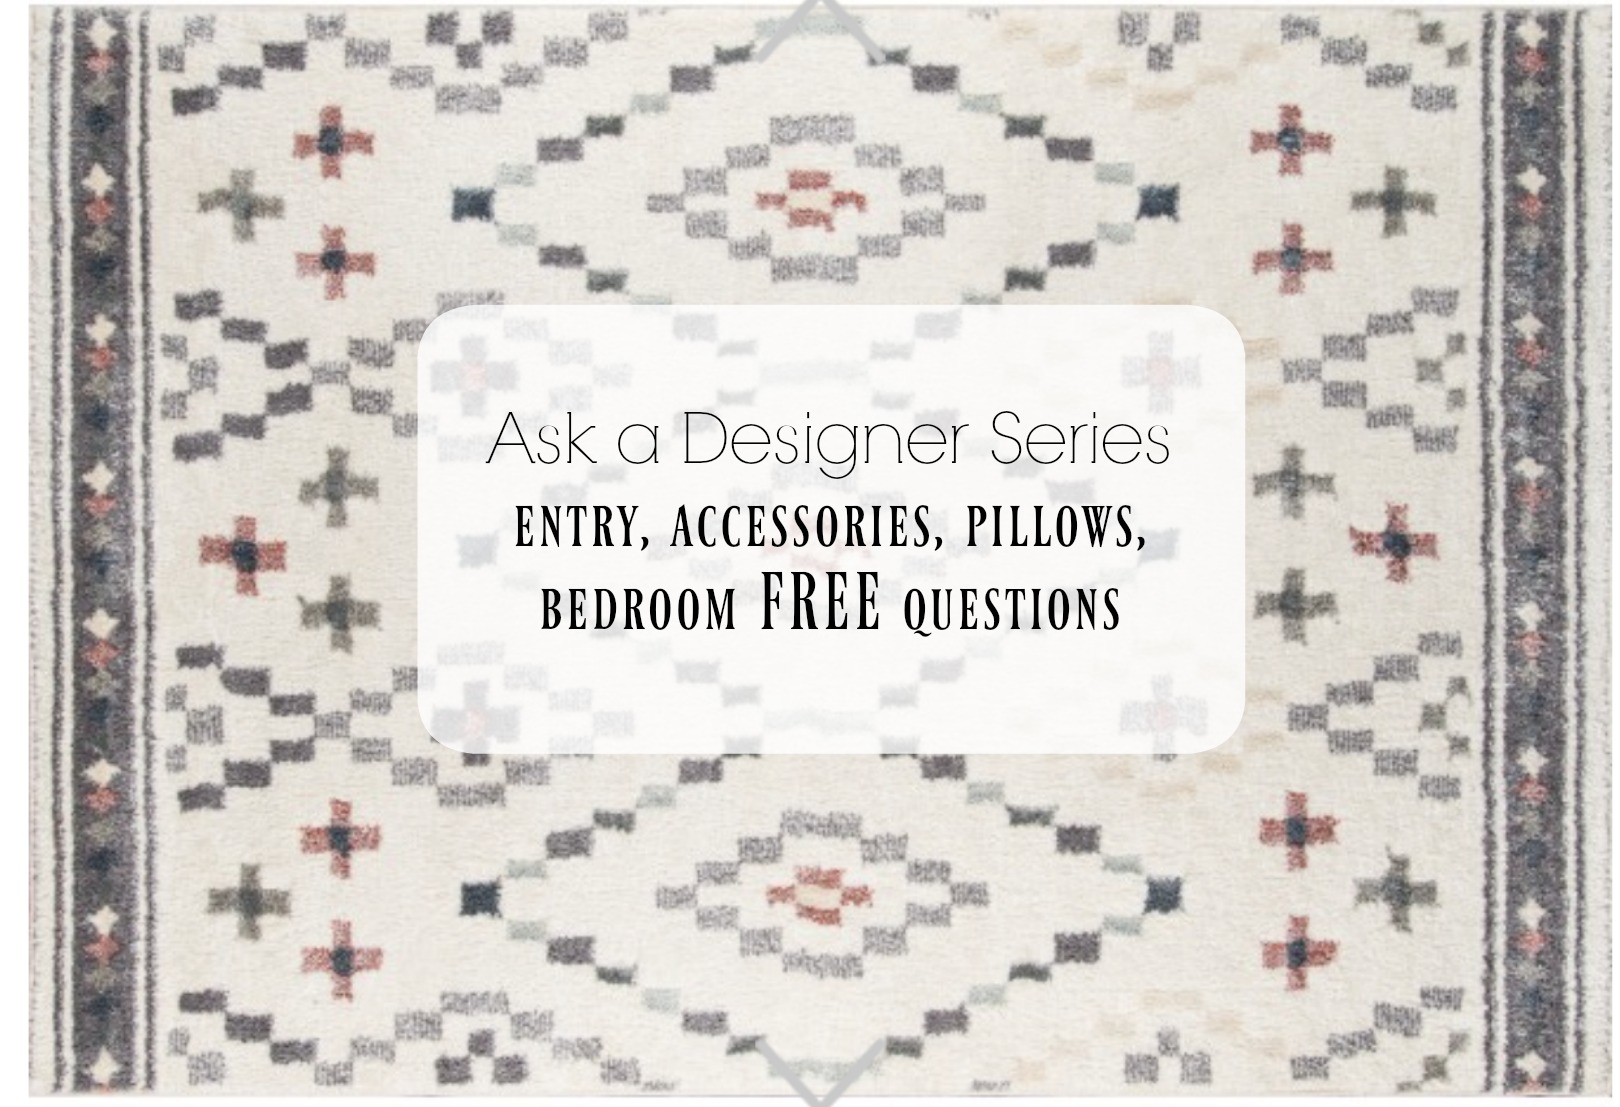 Ask a Designer Series- FREE Design Questions starting with Entries